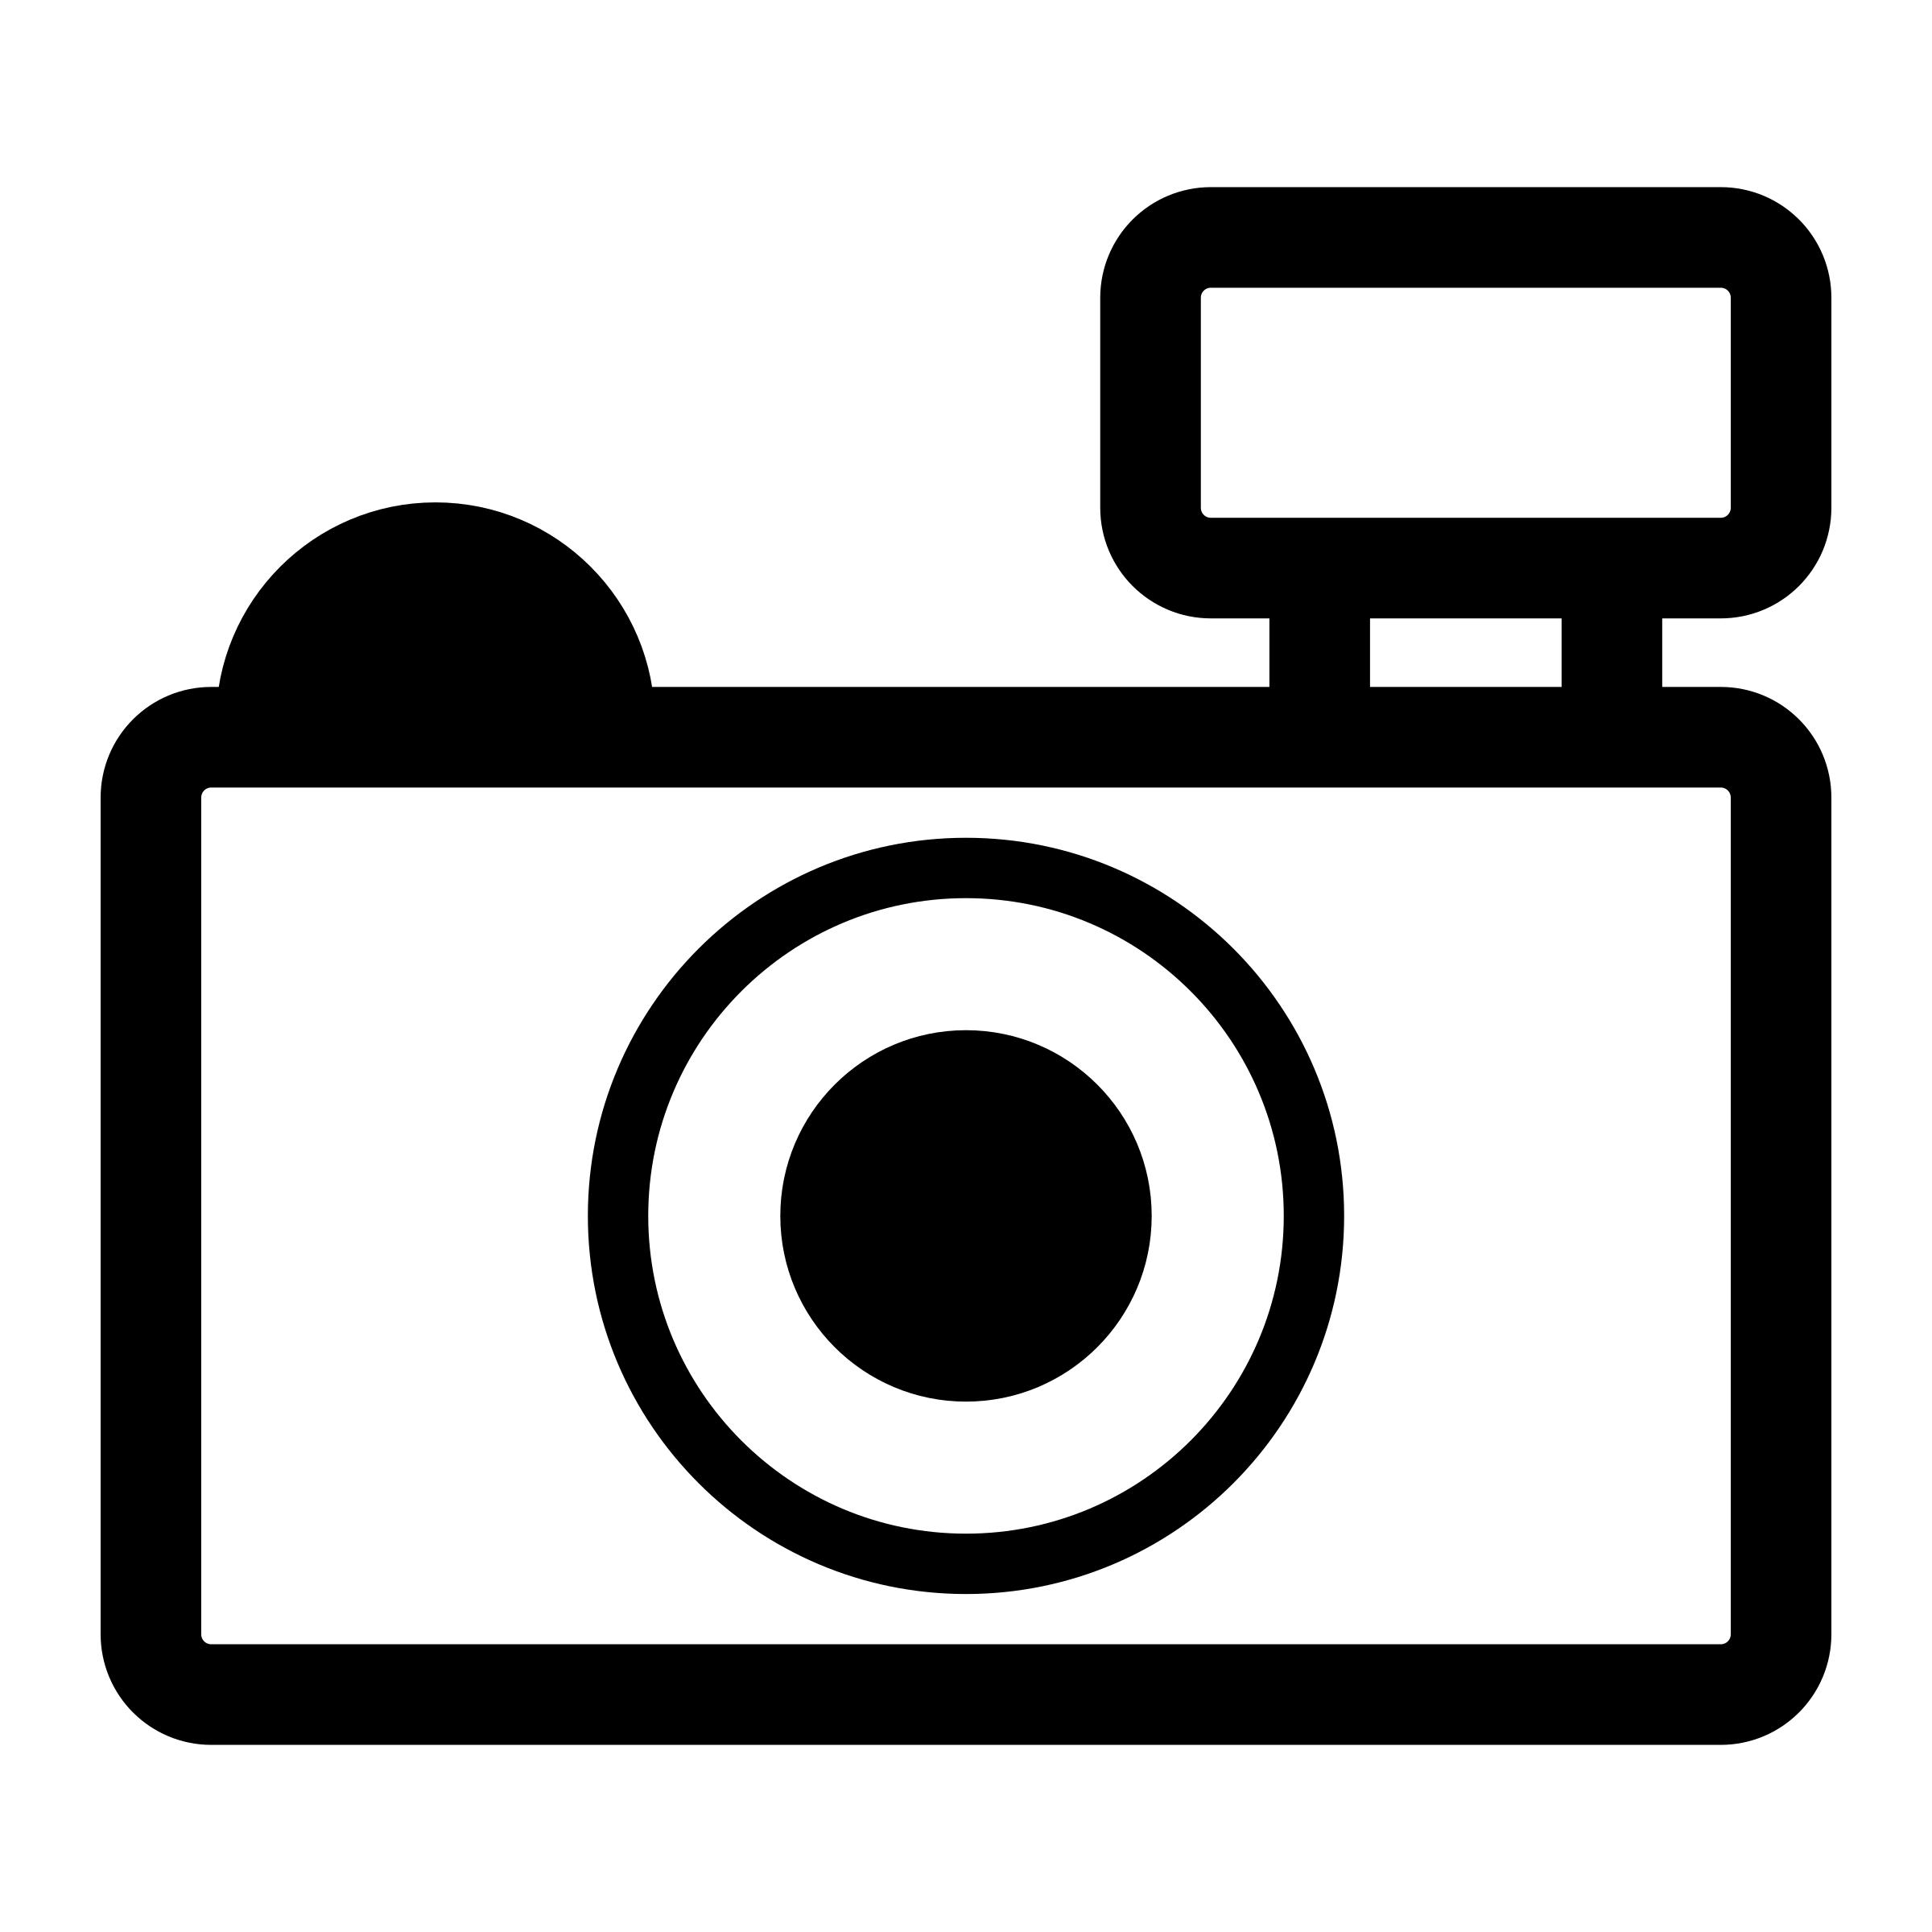 Old camera clipart free clip art image image